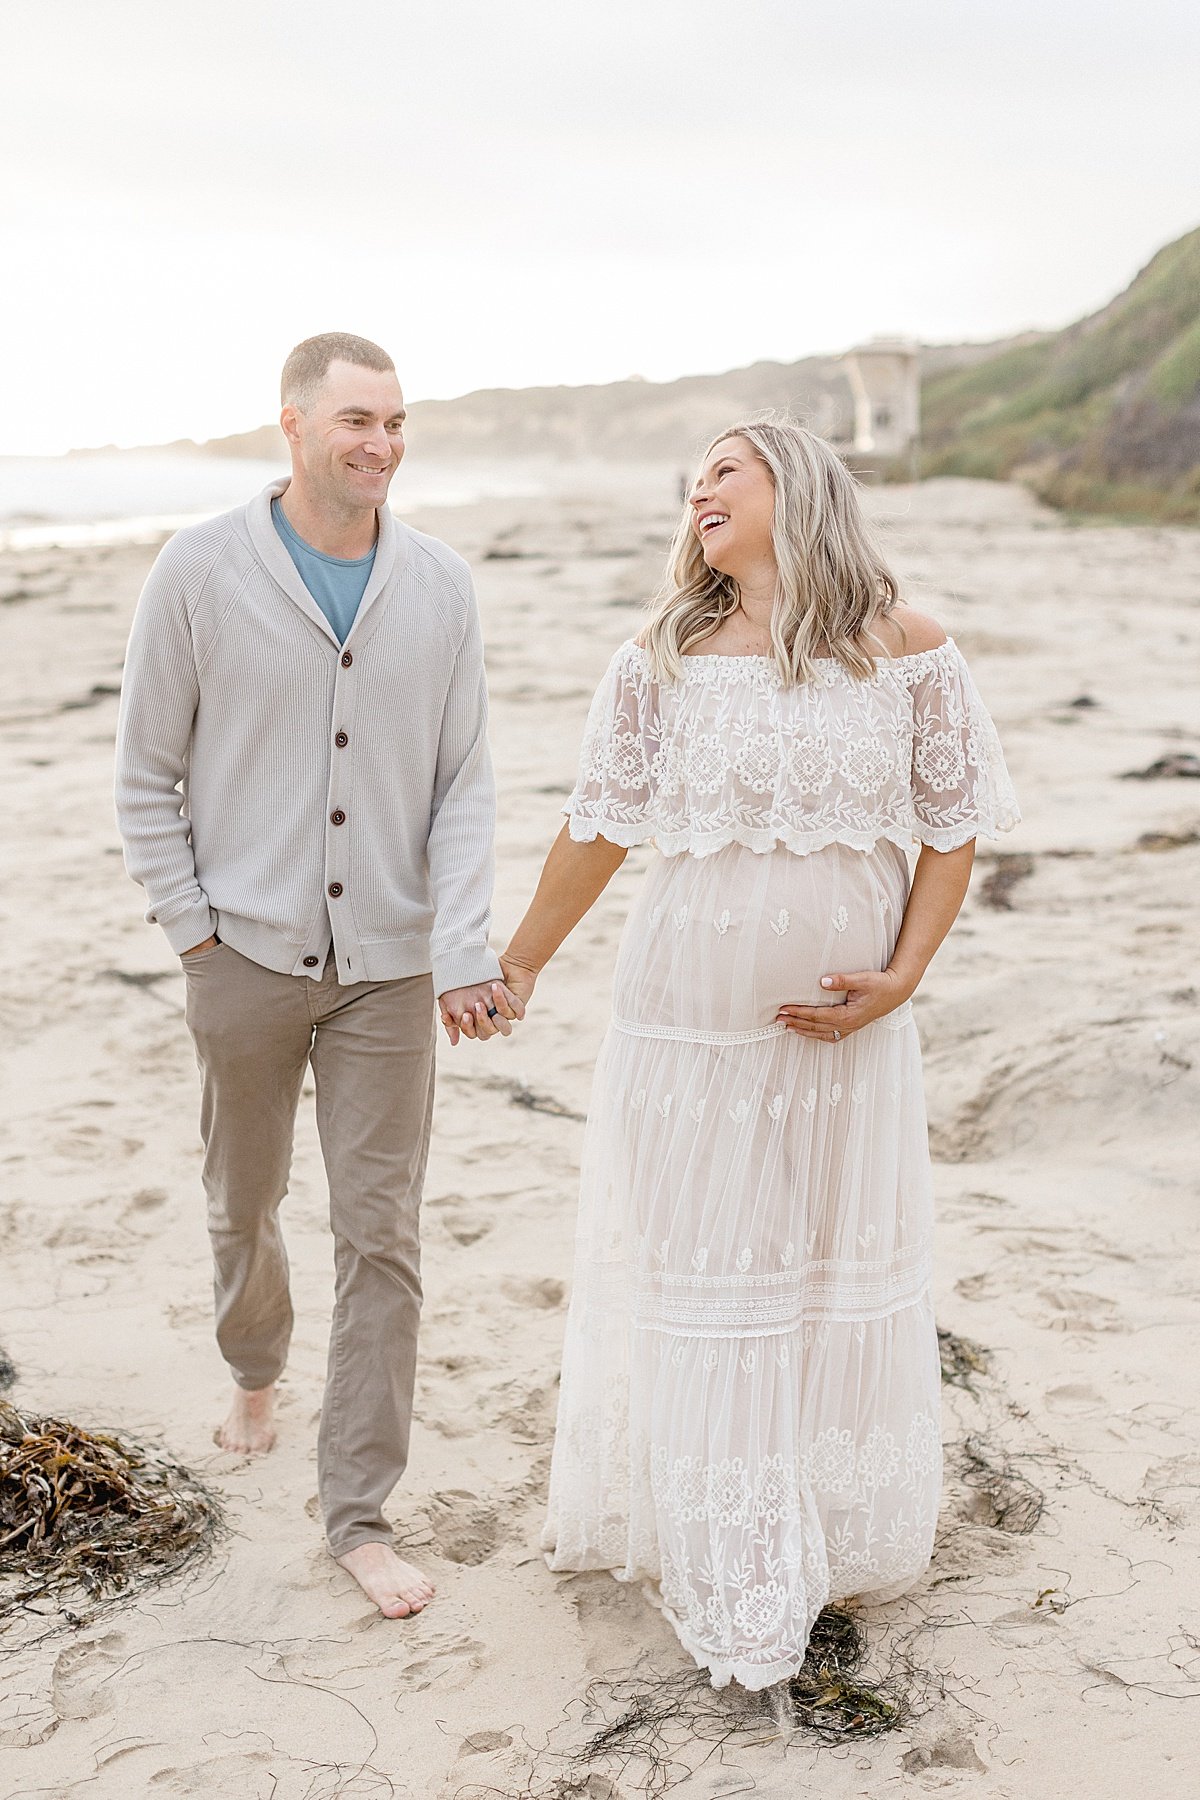 Husband and wife walking together candid portrait | Ambre Williams Photography in Newport Beach